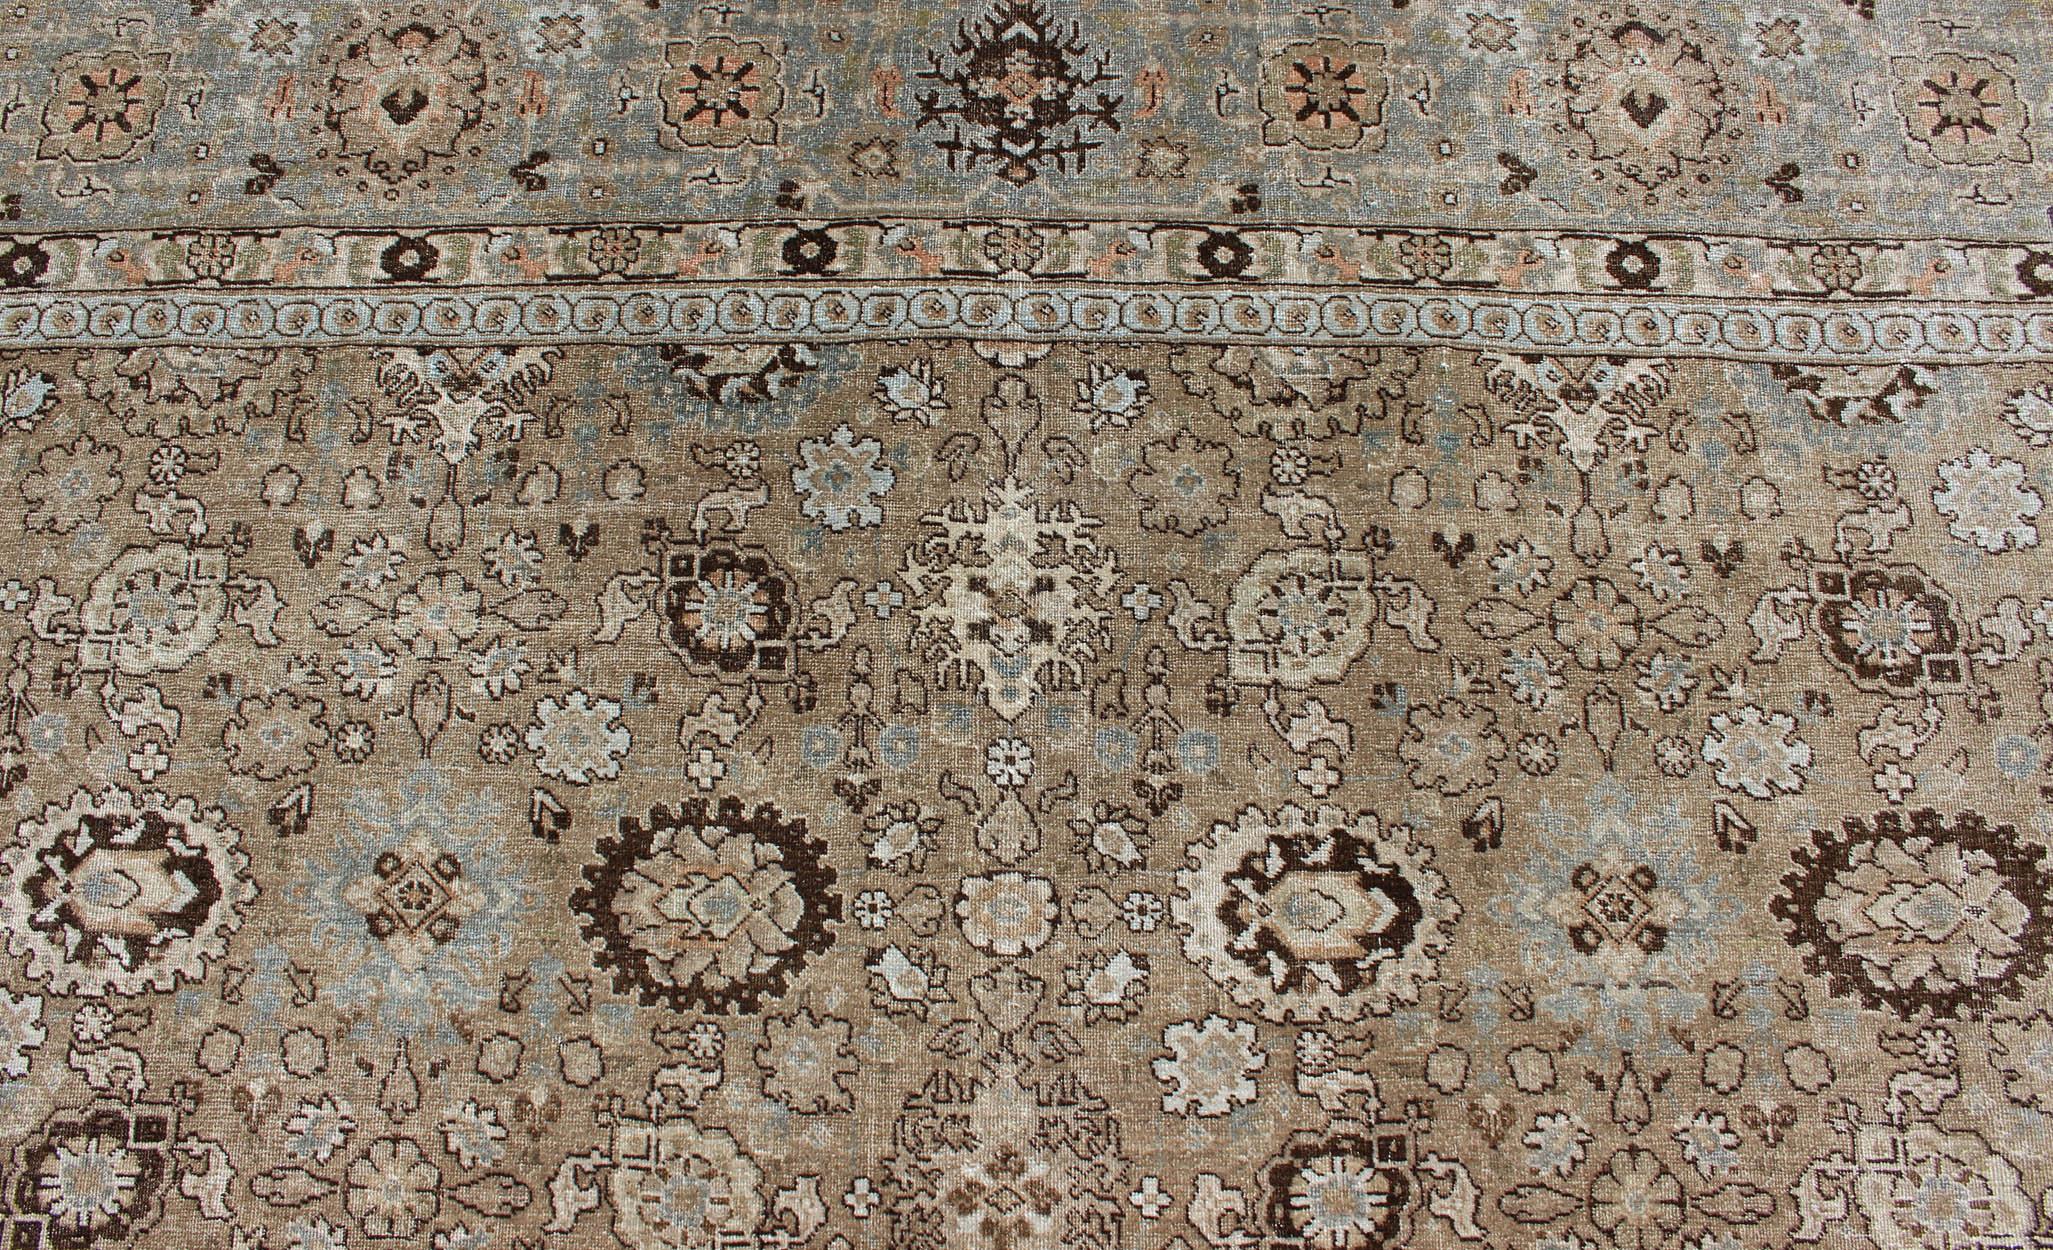 Early 20th Century Antique Persian Tabriz Rug in Mocha, Camel, Brown, Gray and Light Blue For Sale